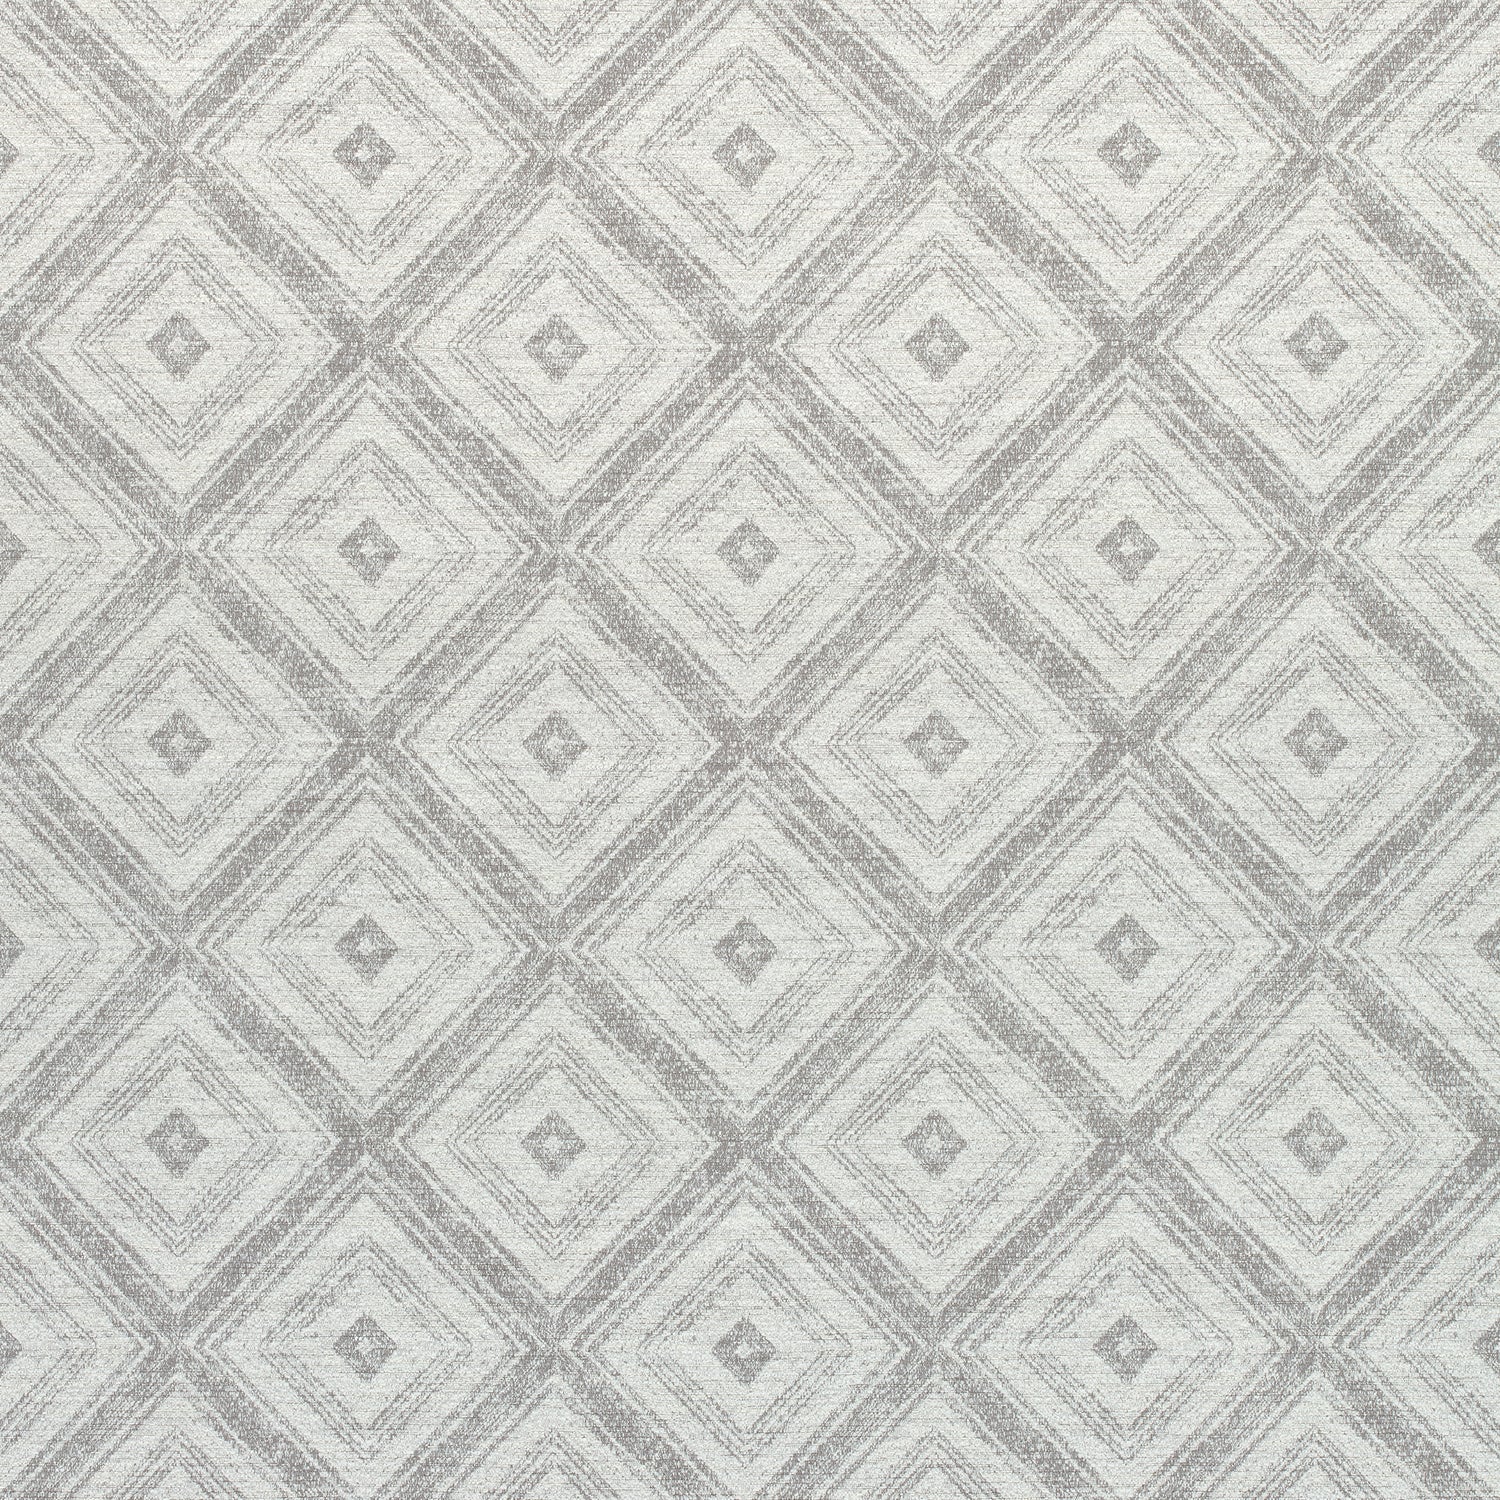 Ellison fabric in taupe color - pattern number W789128 - by Thibaut in the Reverie collection